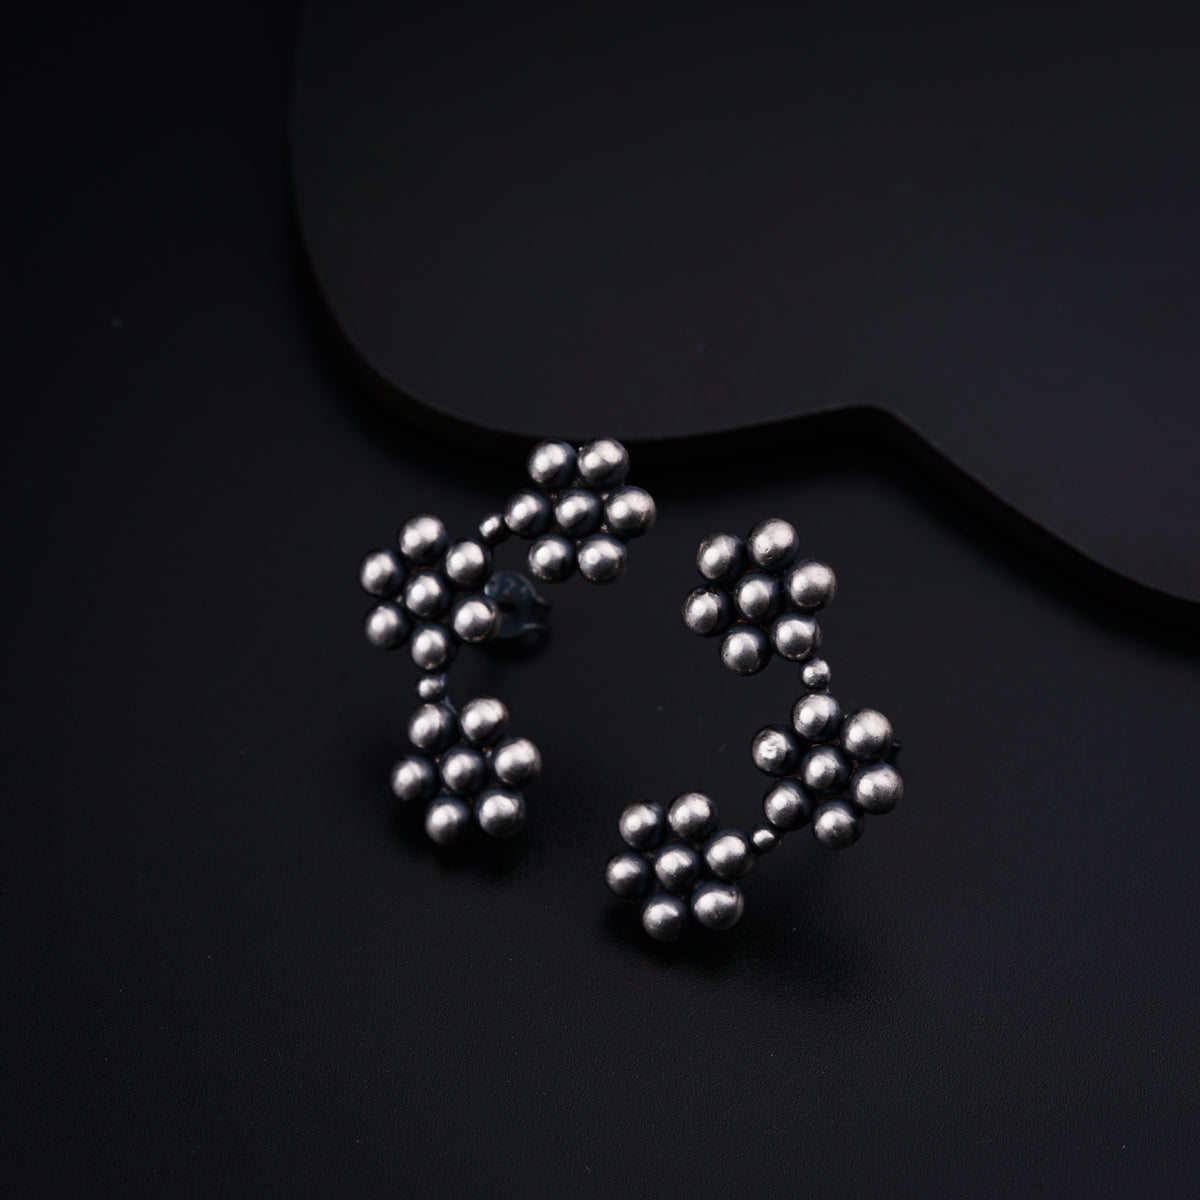 a pair of silver beads on a black surface